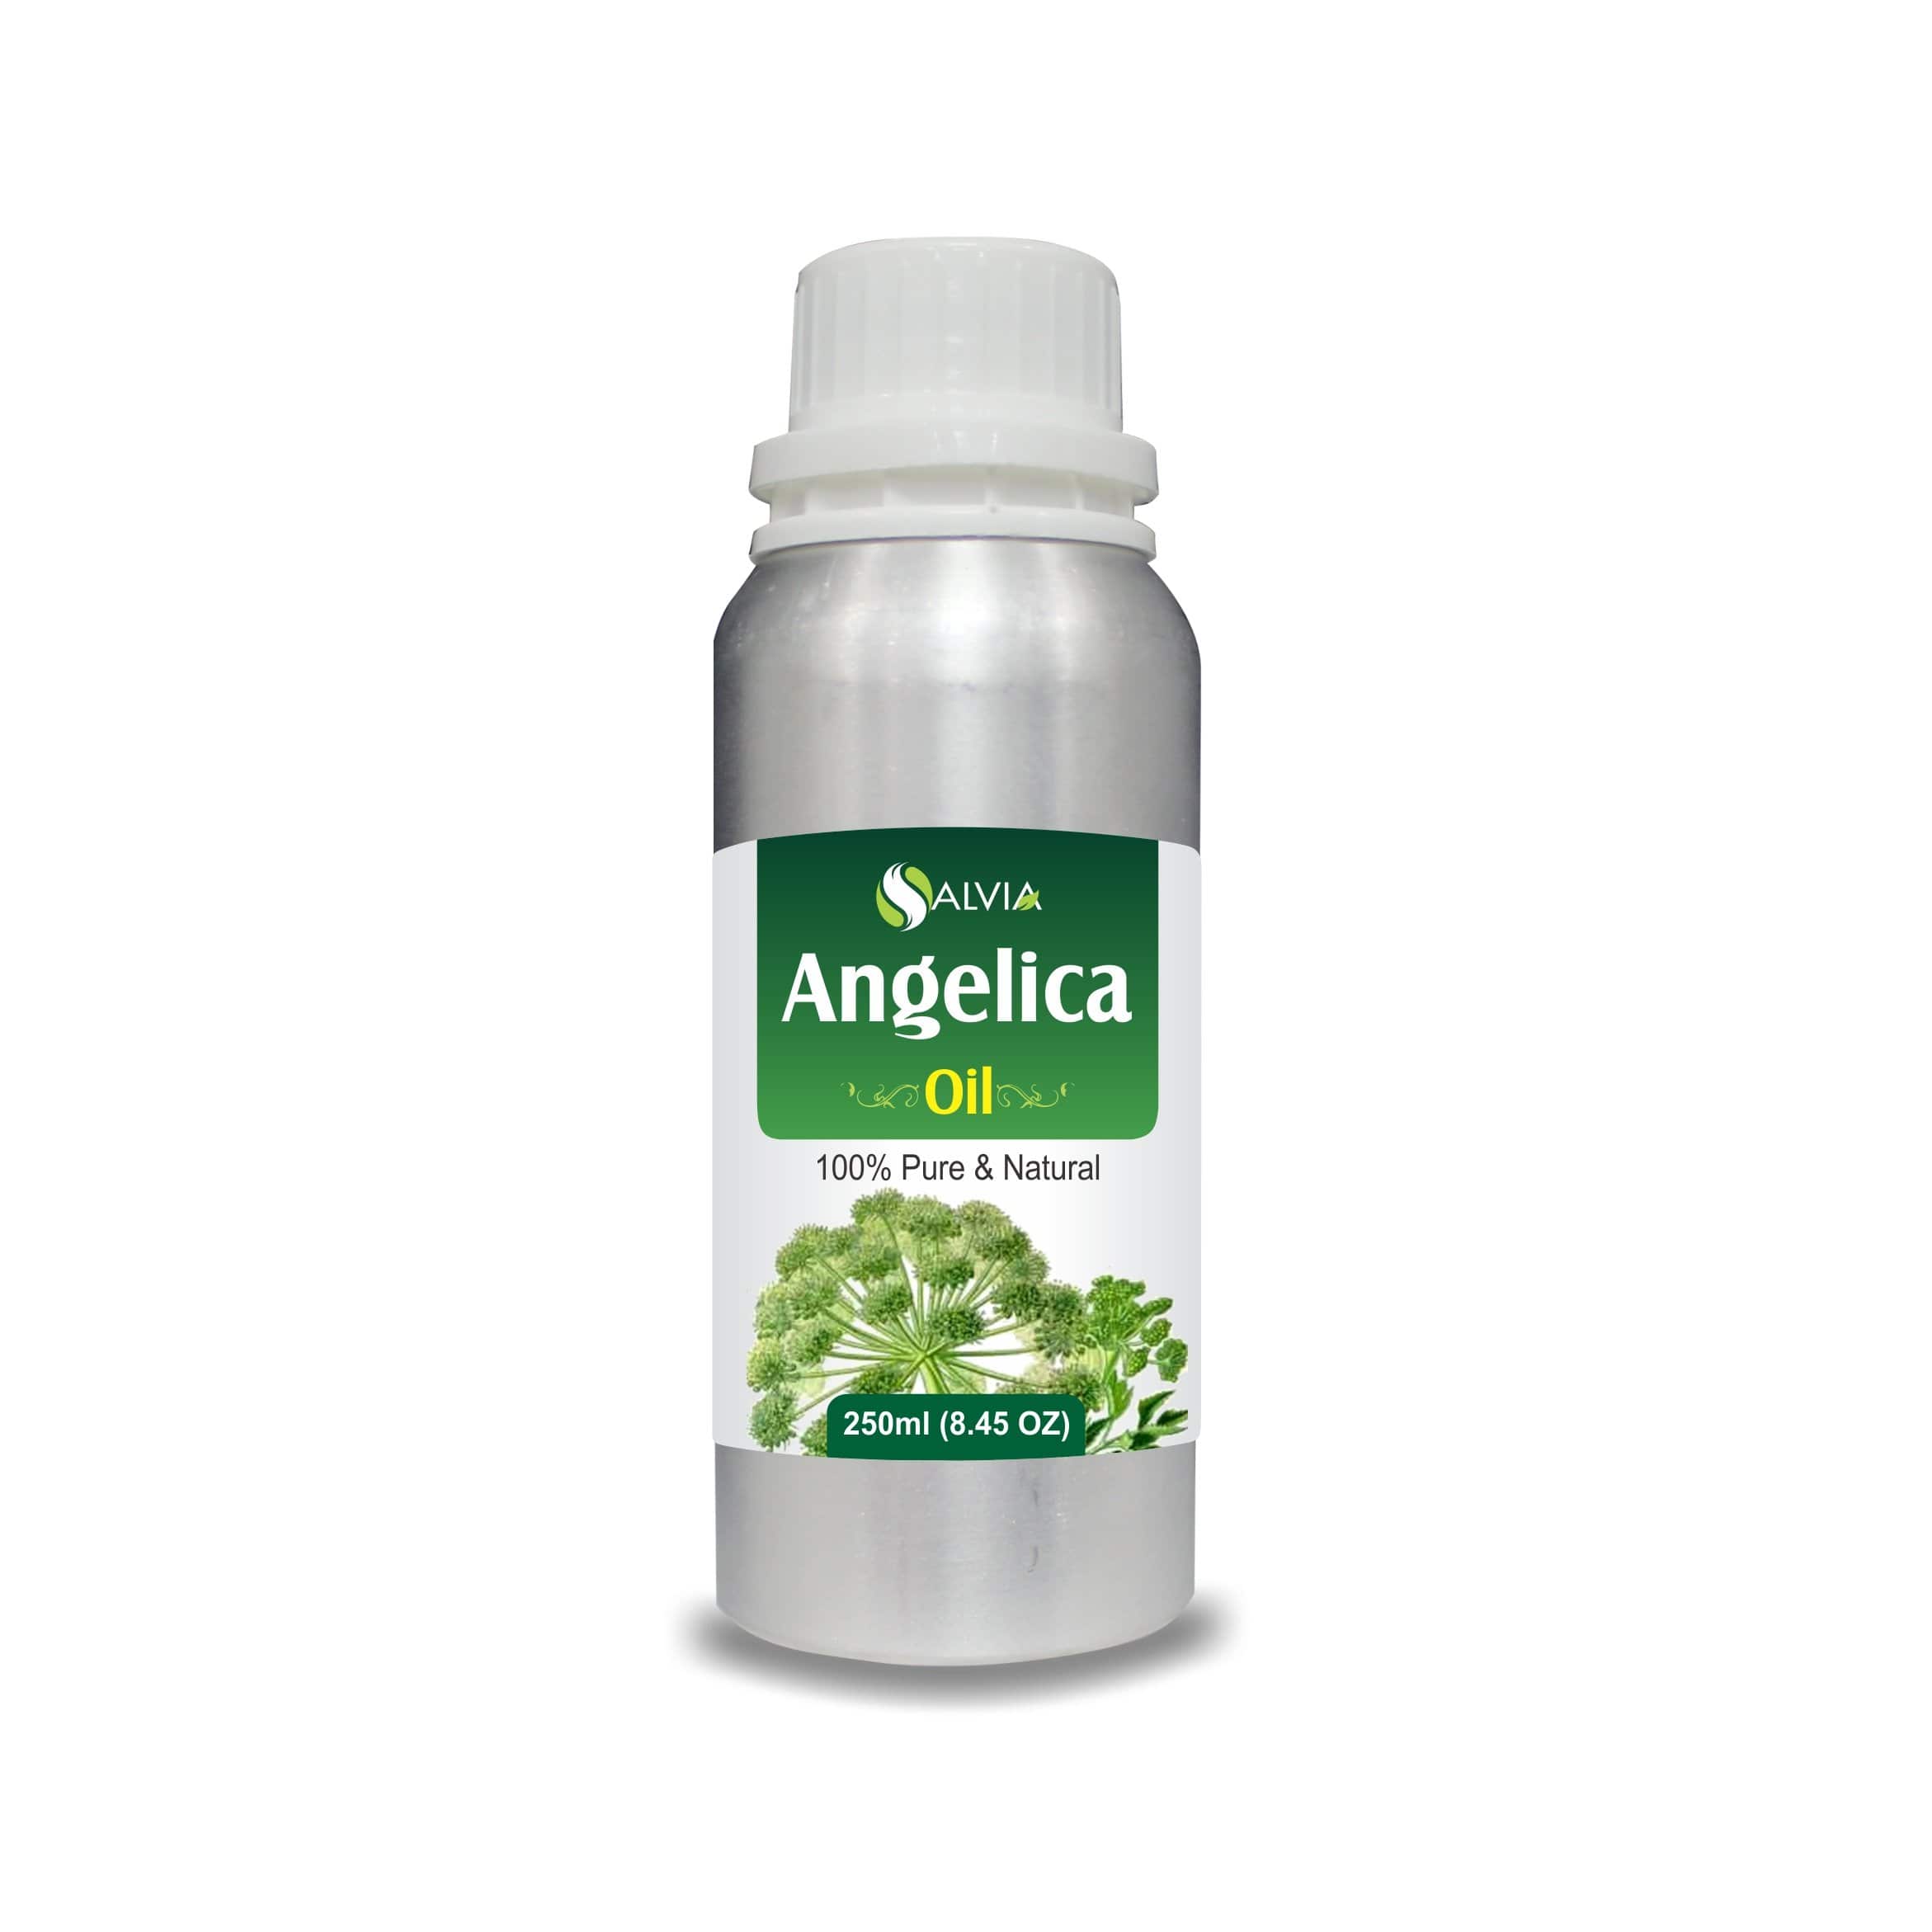 angelica essential oil smell